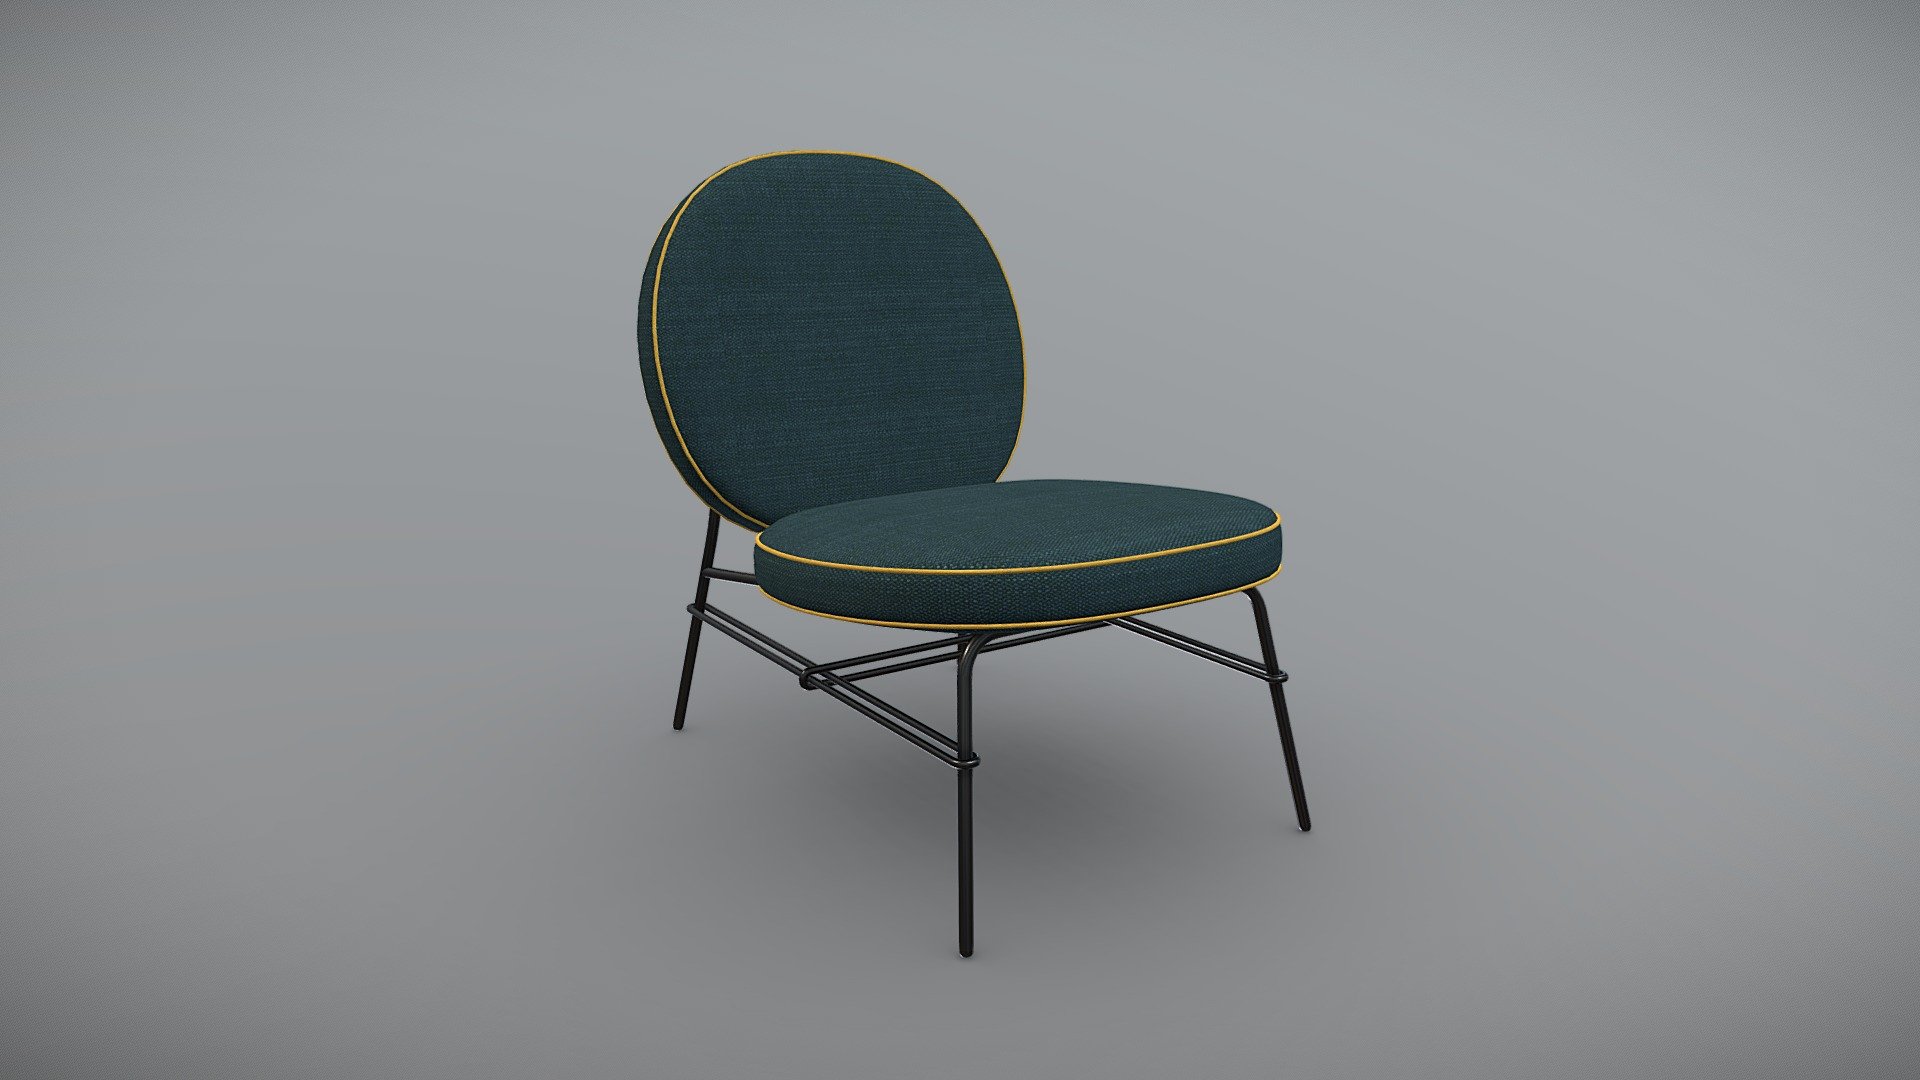 Real world dimension: Width 636 - Depth 827 - Height 843 (mm)

Polycount: Polygon 13,654 - Tris 27,324 - Vertices 13,692




Already UVM Mapped (Overlapping)

Provide with variations of Fabric, Leather, Wood textures (can be found in zip files)

Material Library included for 3Ds Max users.

File types available: MAX, OBJ, FBX, SKP

File unit: mm (real life size)

Render in Marmoset

&ndash;// Thank you for your download //&ndash;
&ndash;// Feel free to contact if you have any issue //&ndash; - Stylized Modern Metallic Legged Armchair - A016 - Buy Royalty Free 3D model by Phuc Nguyen (@phucn) 3d model